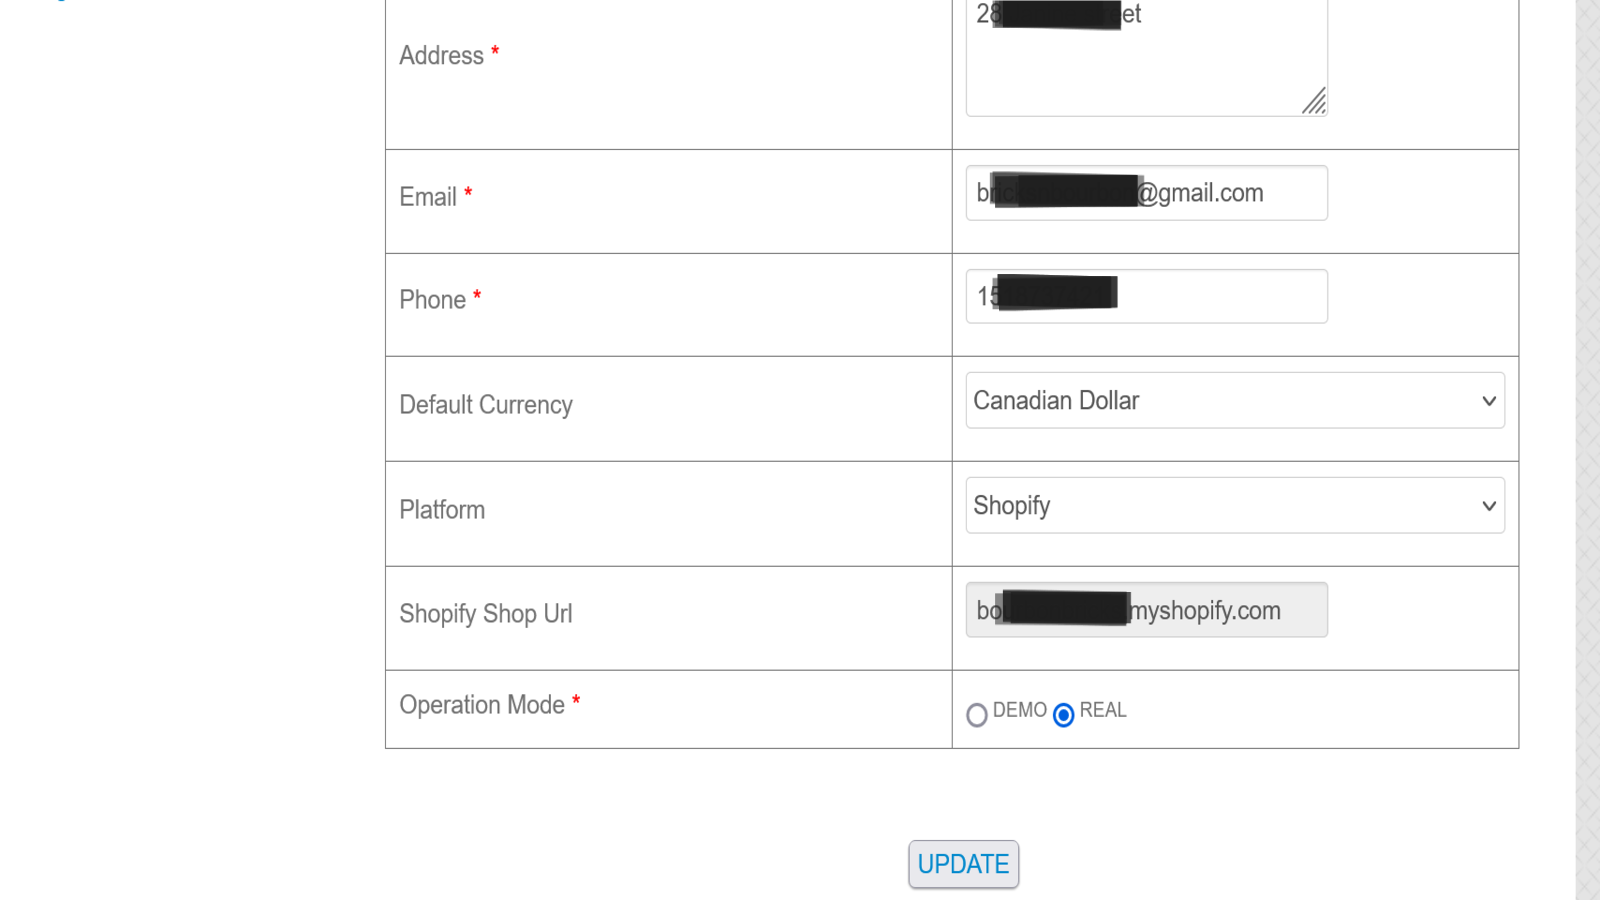 Update Your Details Page